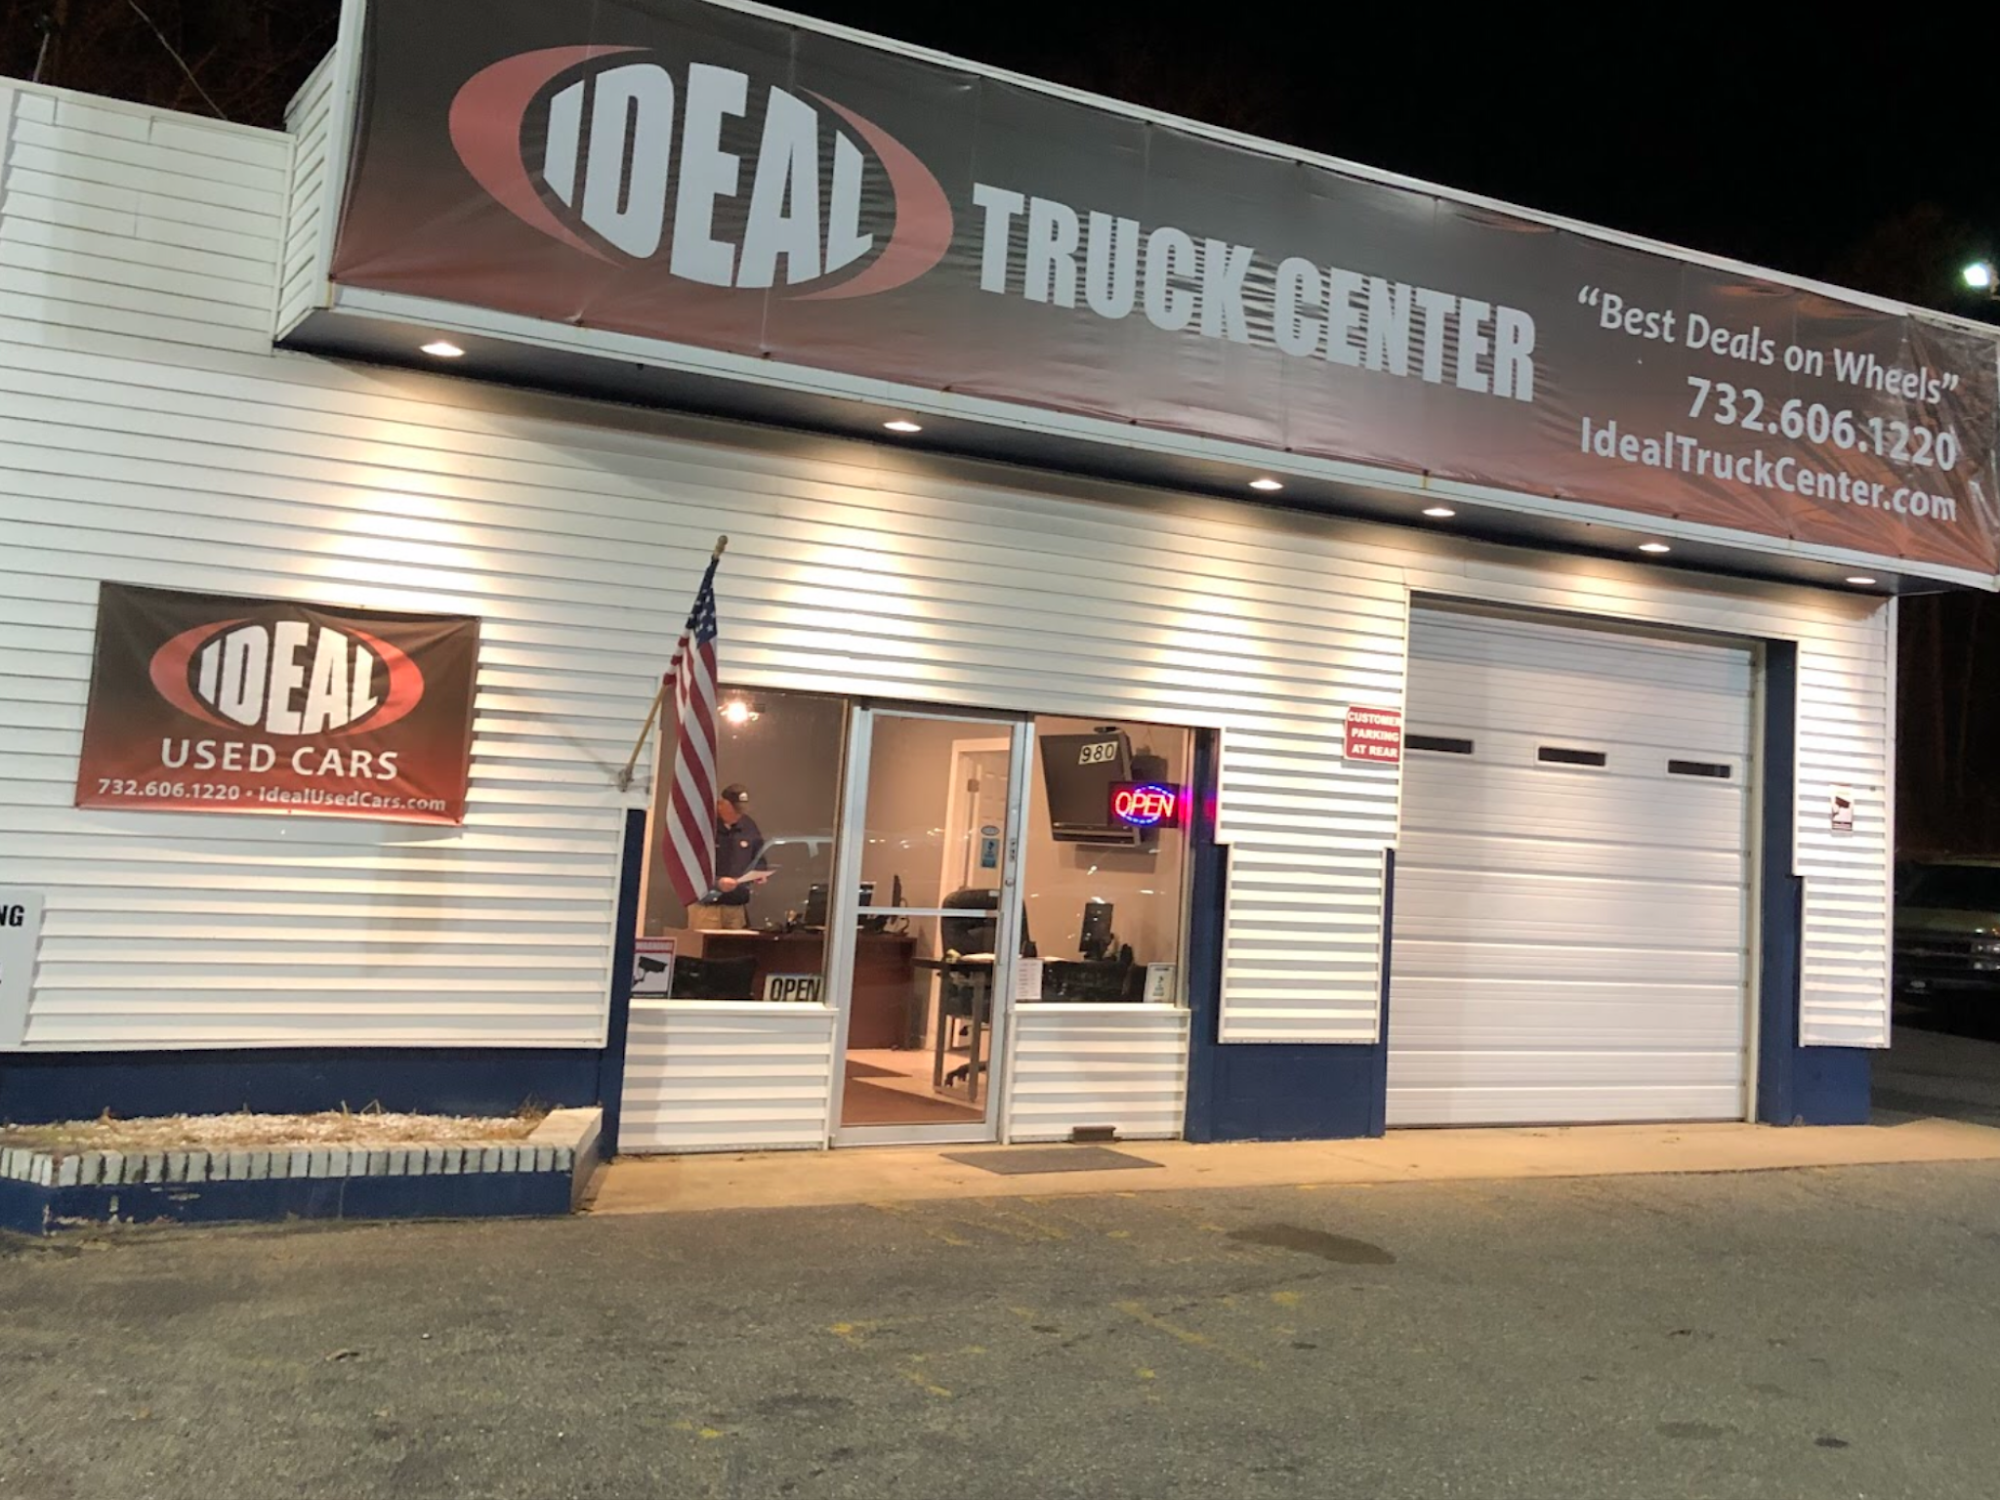 Ideal Used Cars and Truck Center